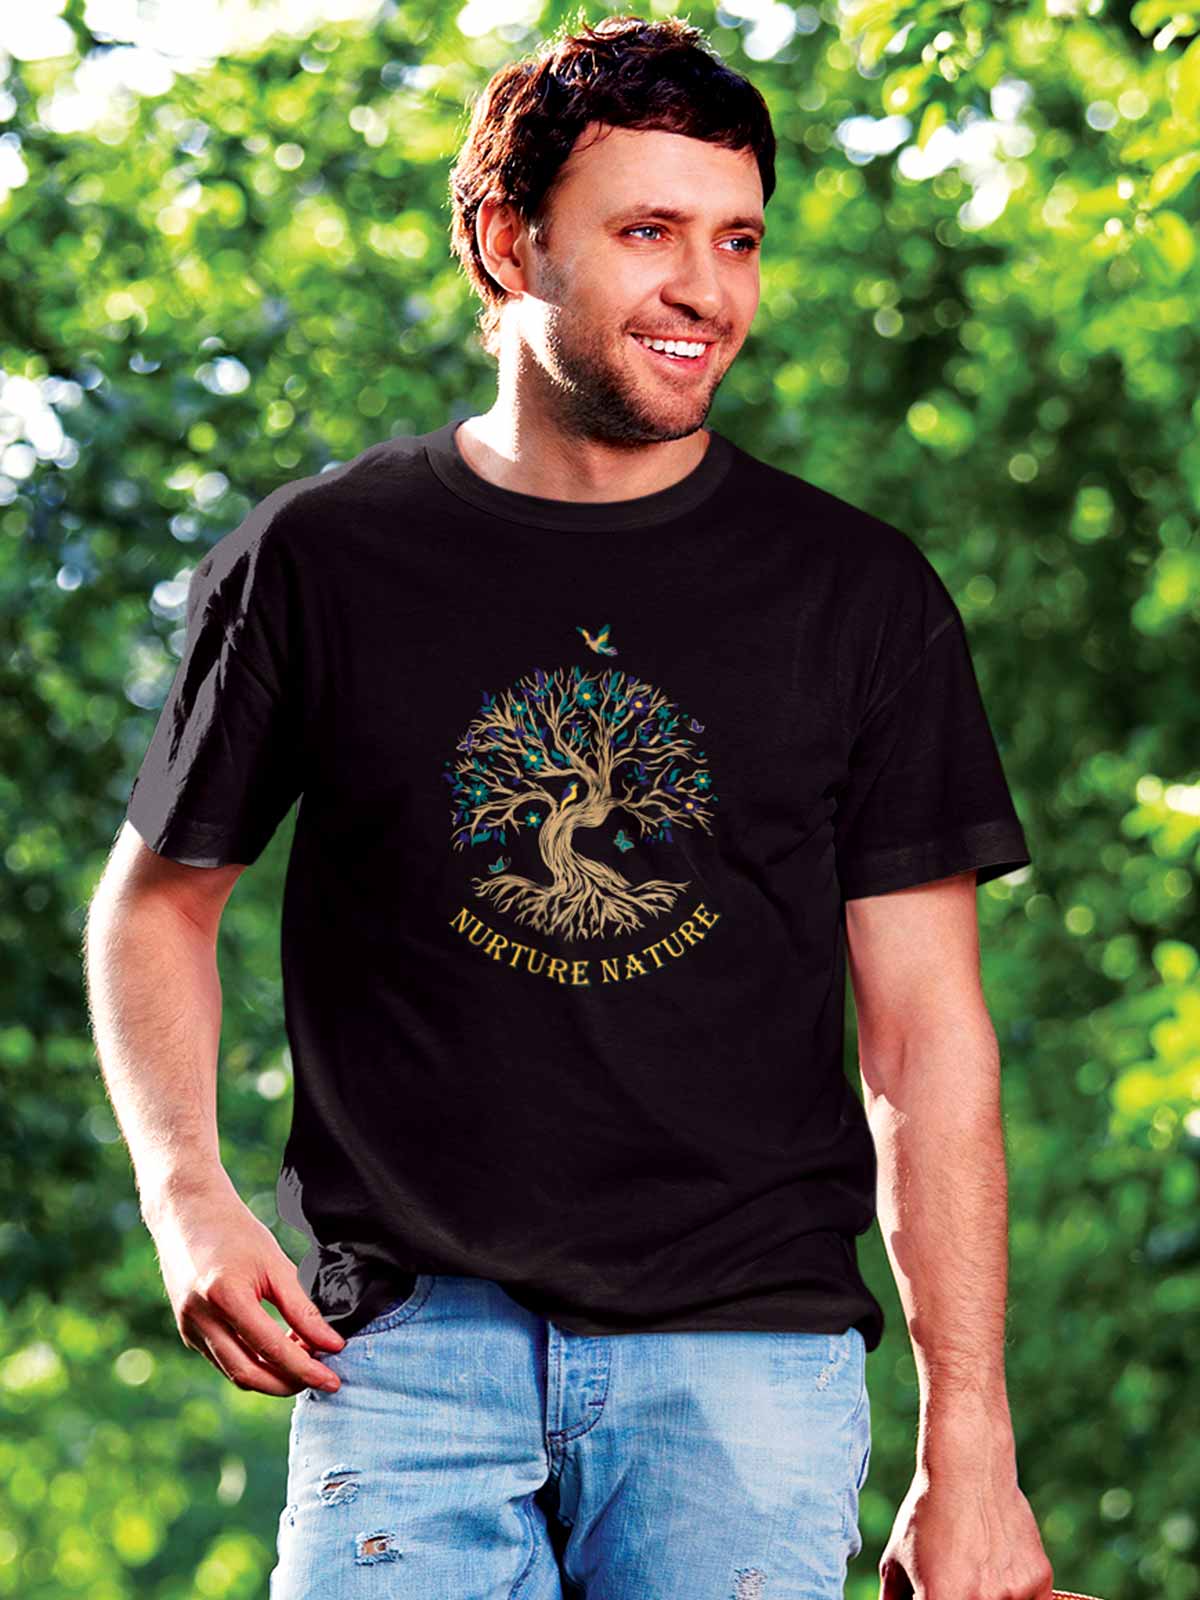 Nurture-nature-printed-t-shirt-for-men by Ghumakkad